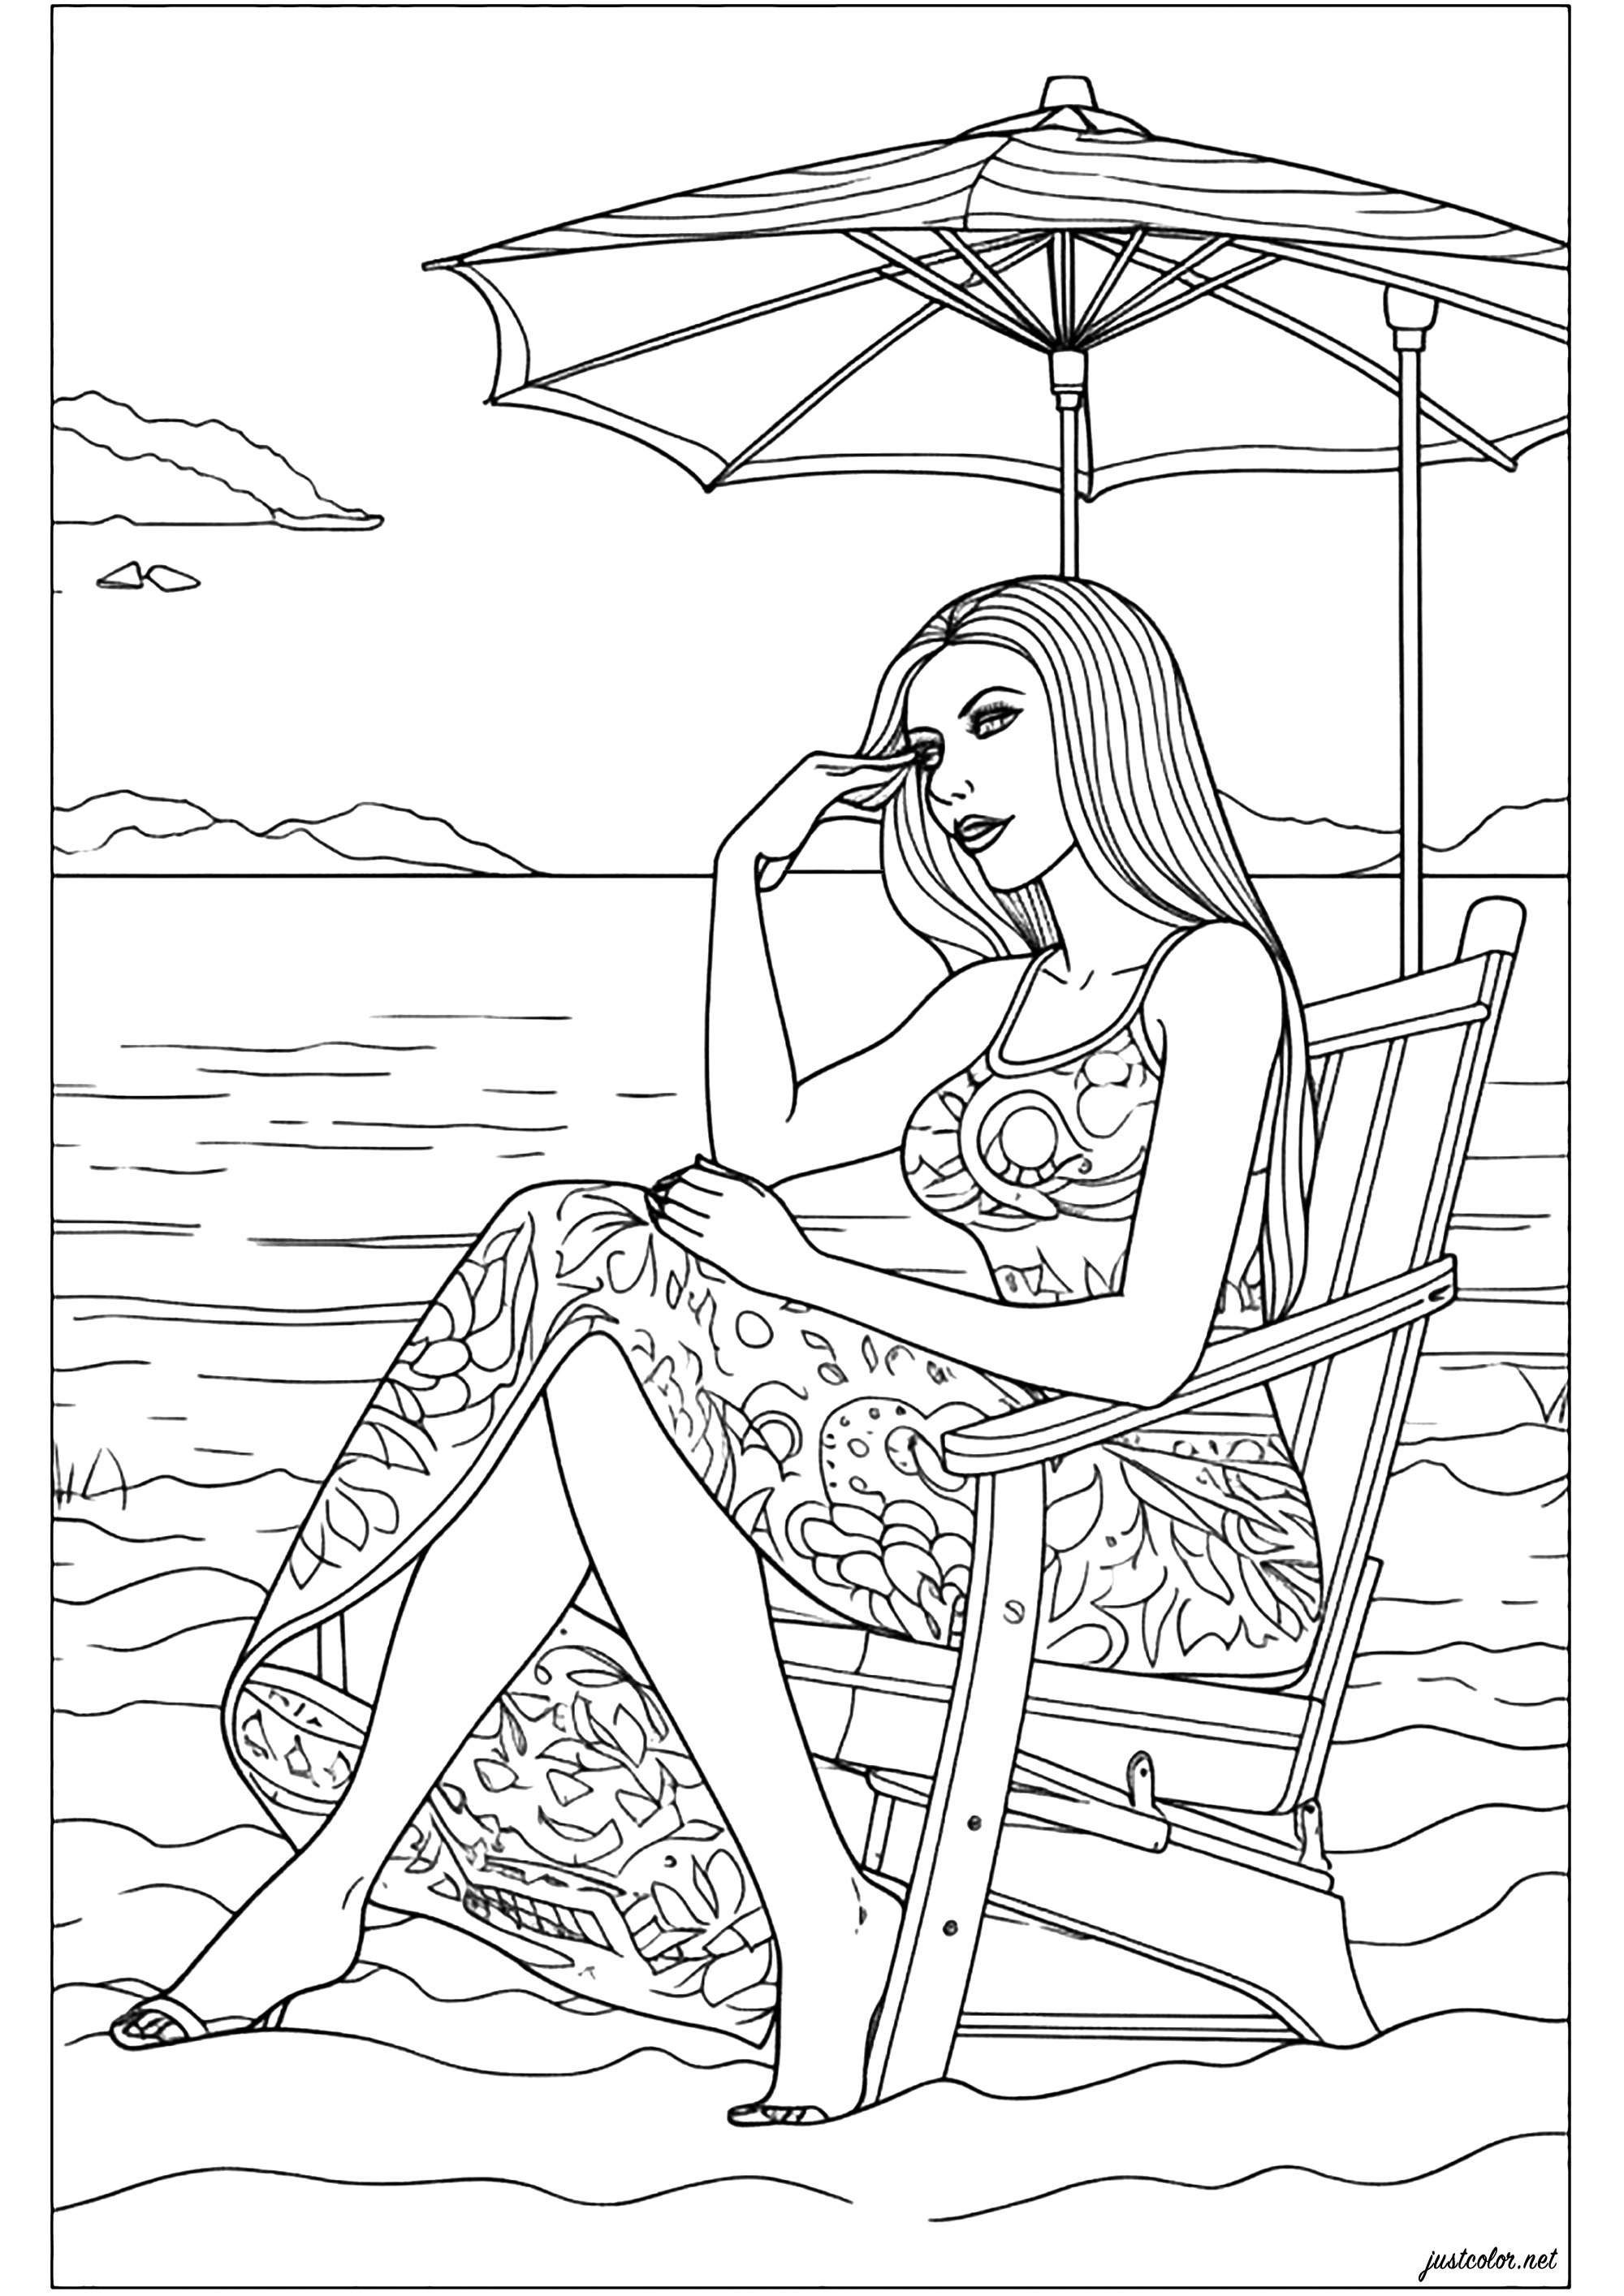 Woman sitting on the beach, elegant and pensive. An original coloring book that will make you want to go on vacation, on a calm beach, just listening to the sound of the waves...